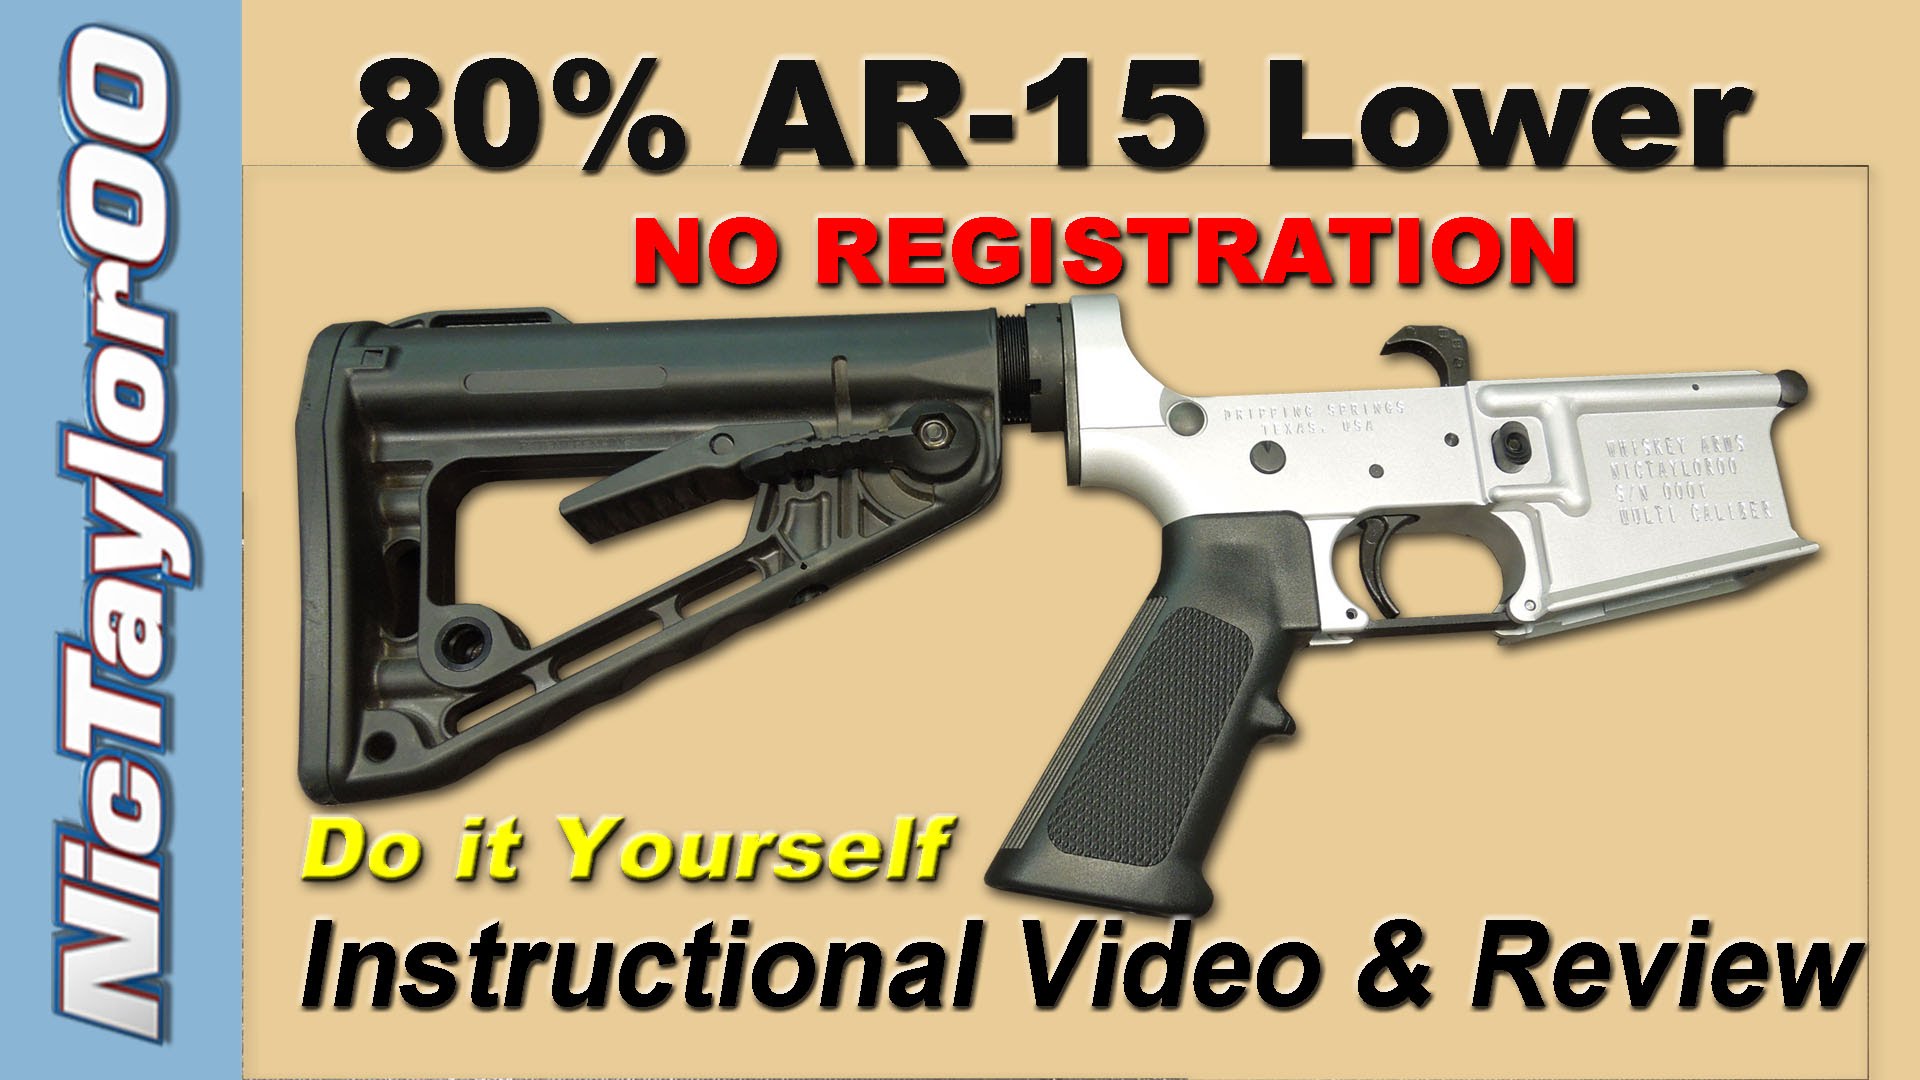 Assault Weapon Kit - The 80% AR-15 Lower Do it Yourself Instructions